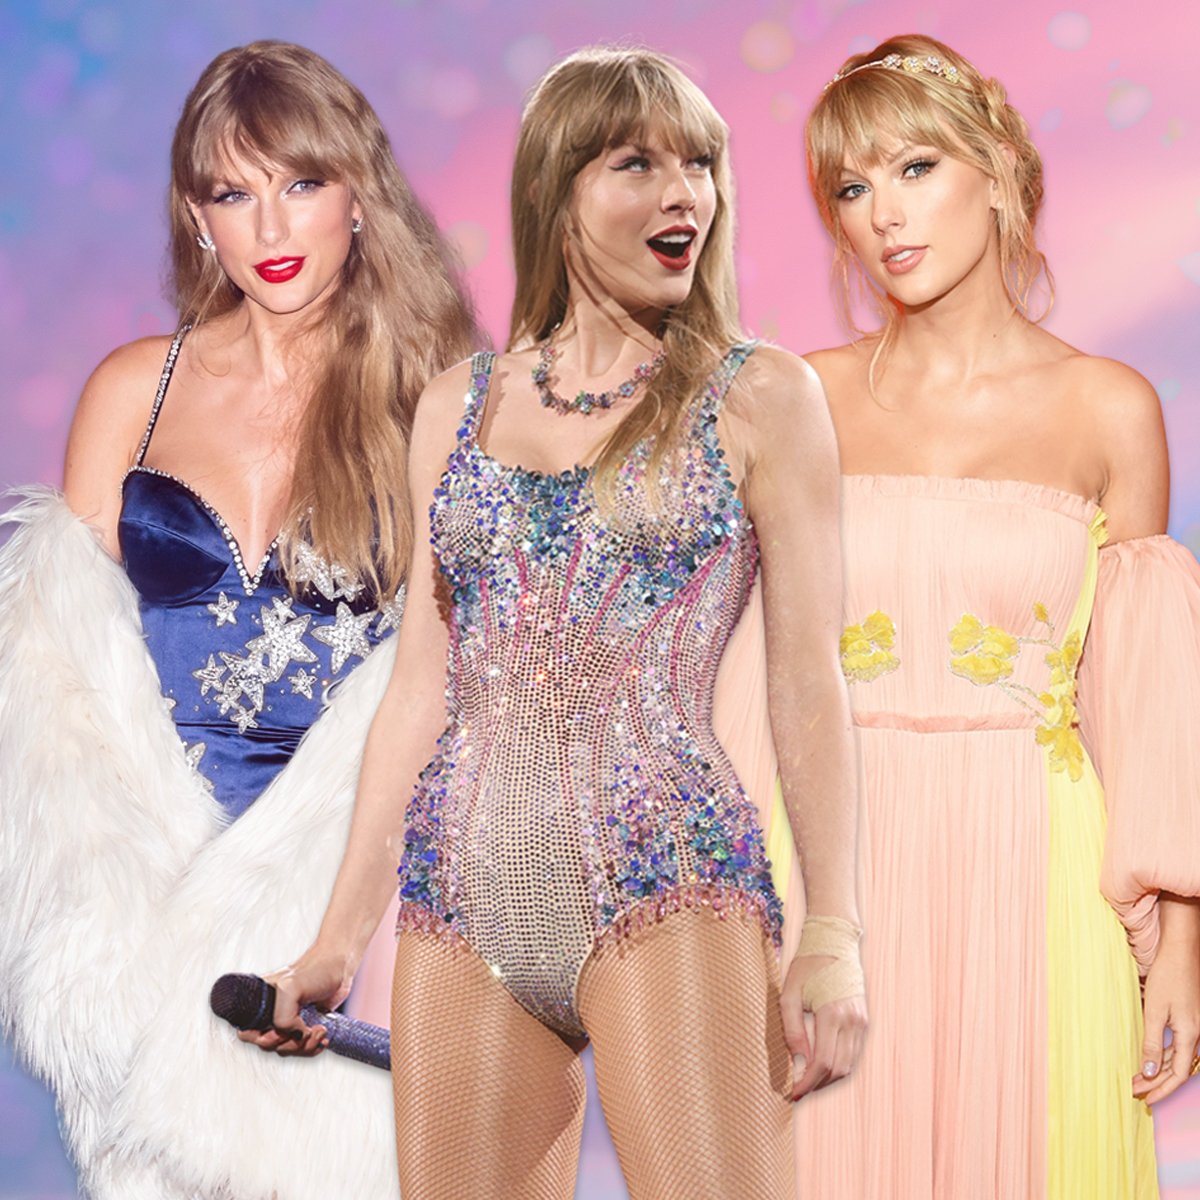 Taylor Swift's birthday: 13 reasons for her to celebrate the big 34